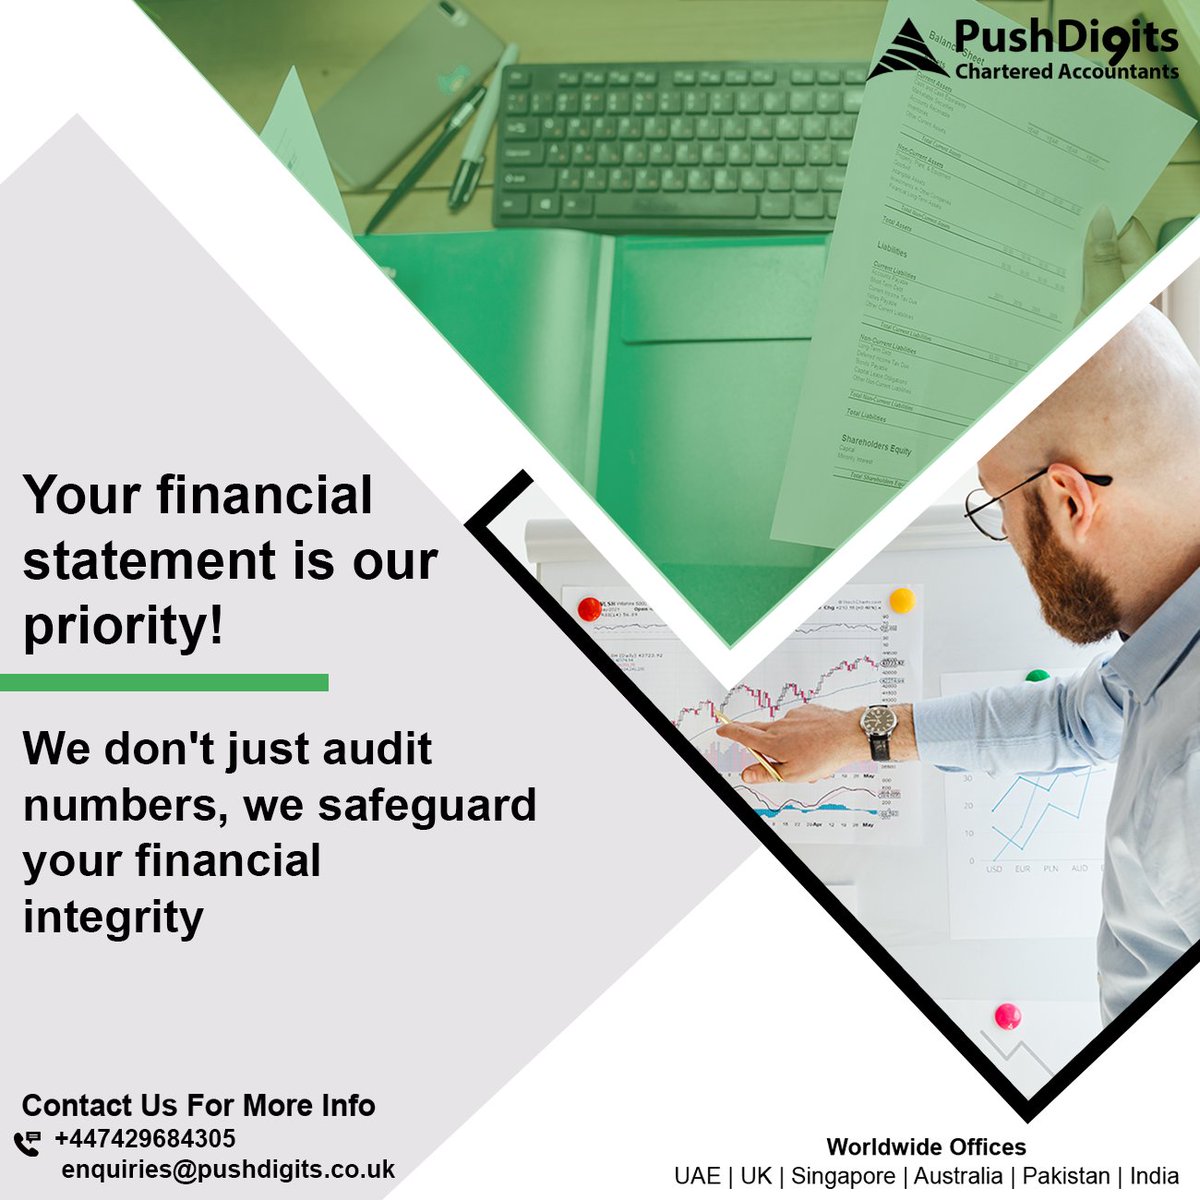 We go beyond audits, we protect your financial legacy. Join hands with us for a secure tomorrow!

pushdigits.co.uk

#Pushdigits #AuditFirm #FinancialIntegrity #AuditExperts #NumbersMatter #FinancialSecurity #TrustworthyAuditors #ProtectingYourAssets #AuditAssurance